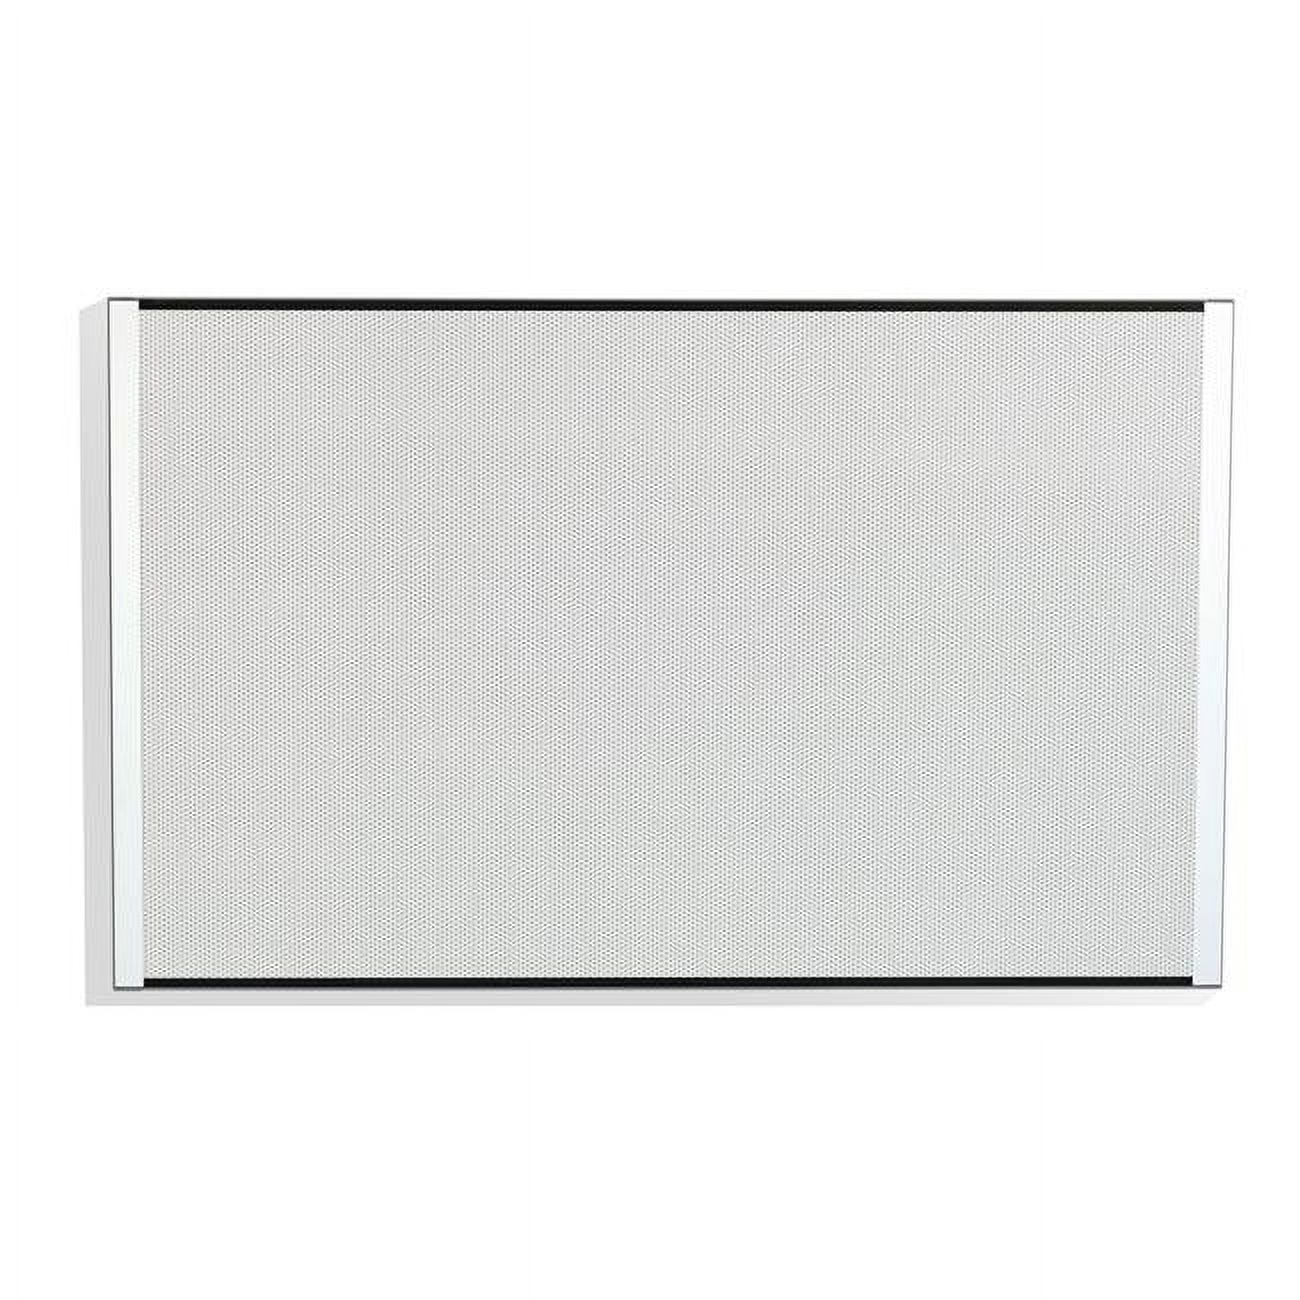 Iceberg 34111 24 X 38 In. Perforated Steel Magnetic & Tackable Bulletin Board, White